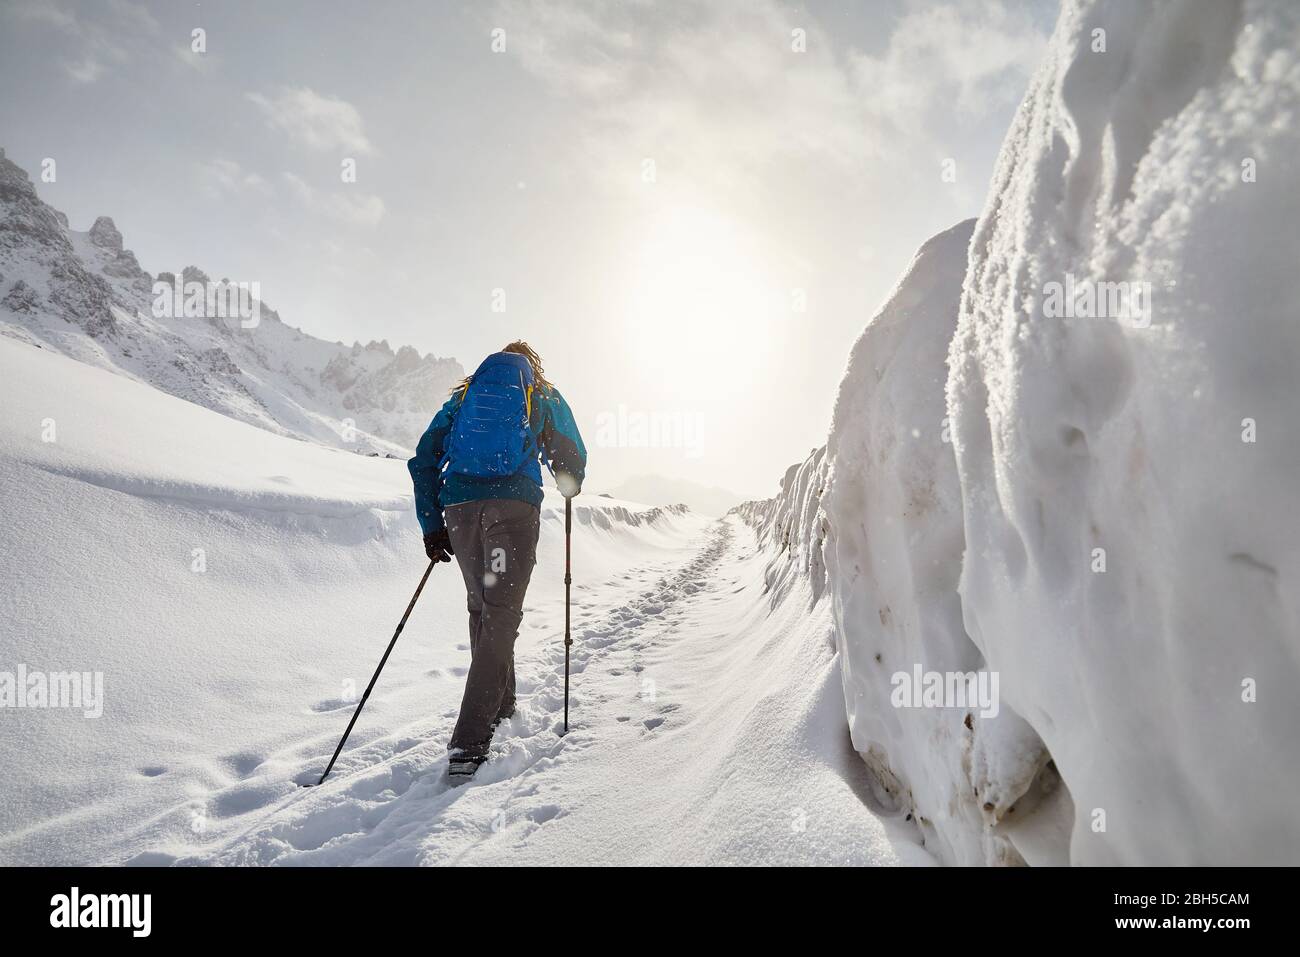 Tourist with blue backpack walking on the snow road in the mountains at snowfall Stock Photo